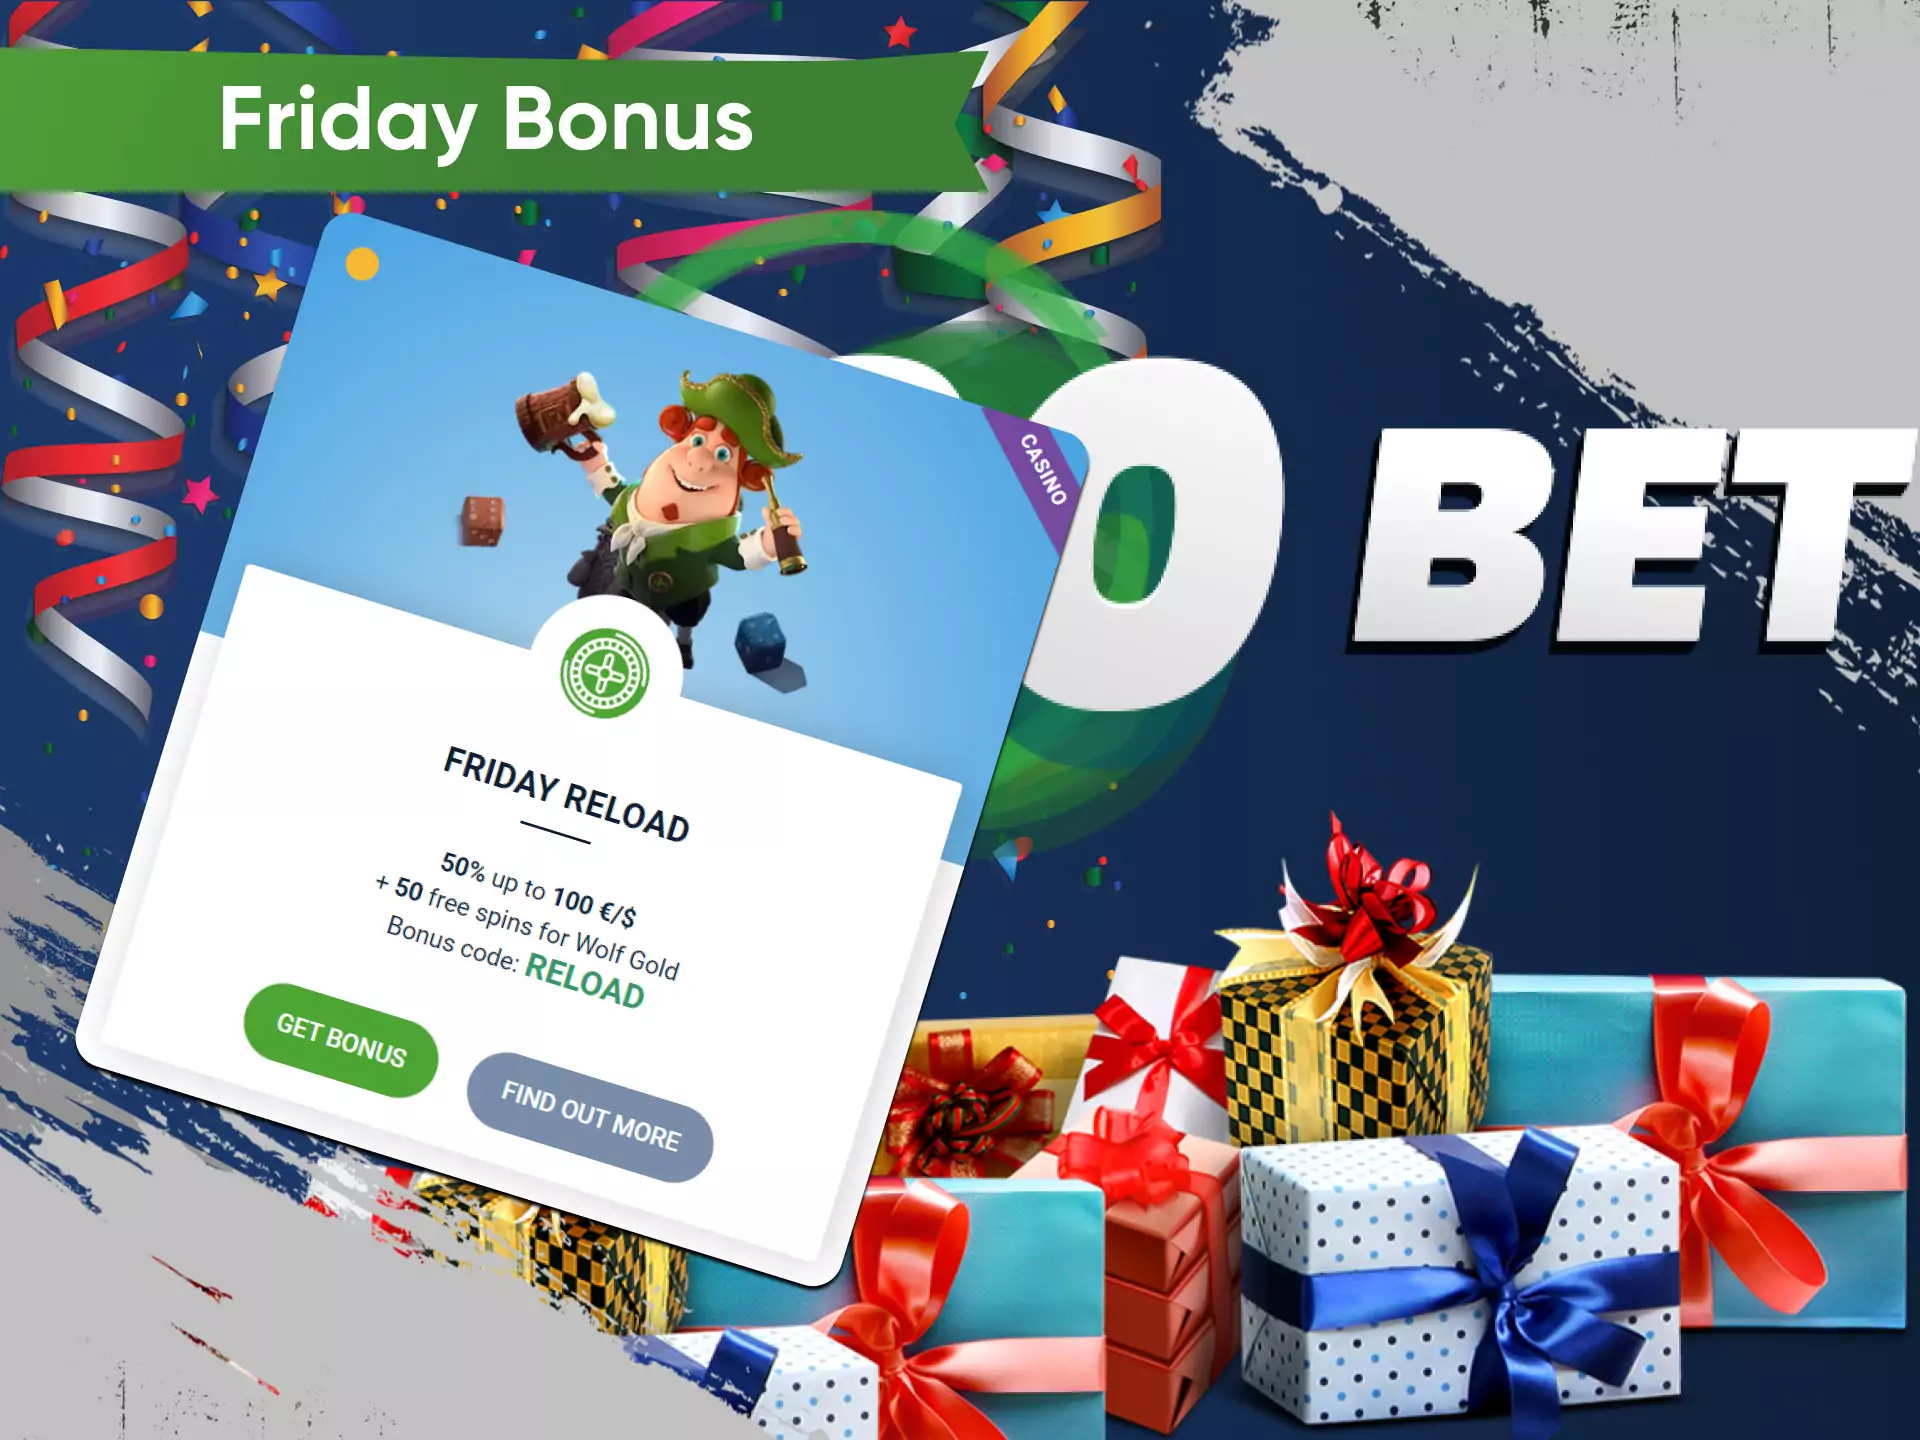 On Fridays, you can count on additional bonuses from 20bet.